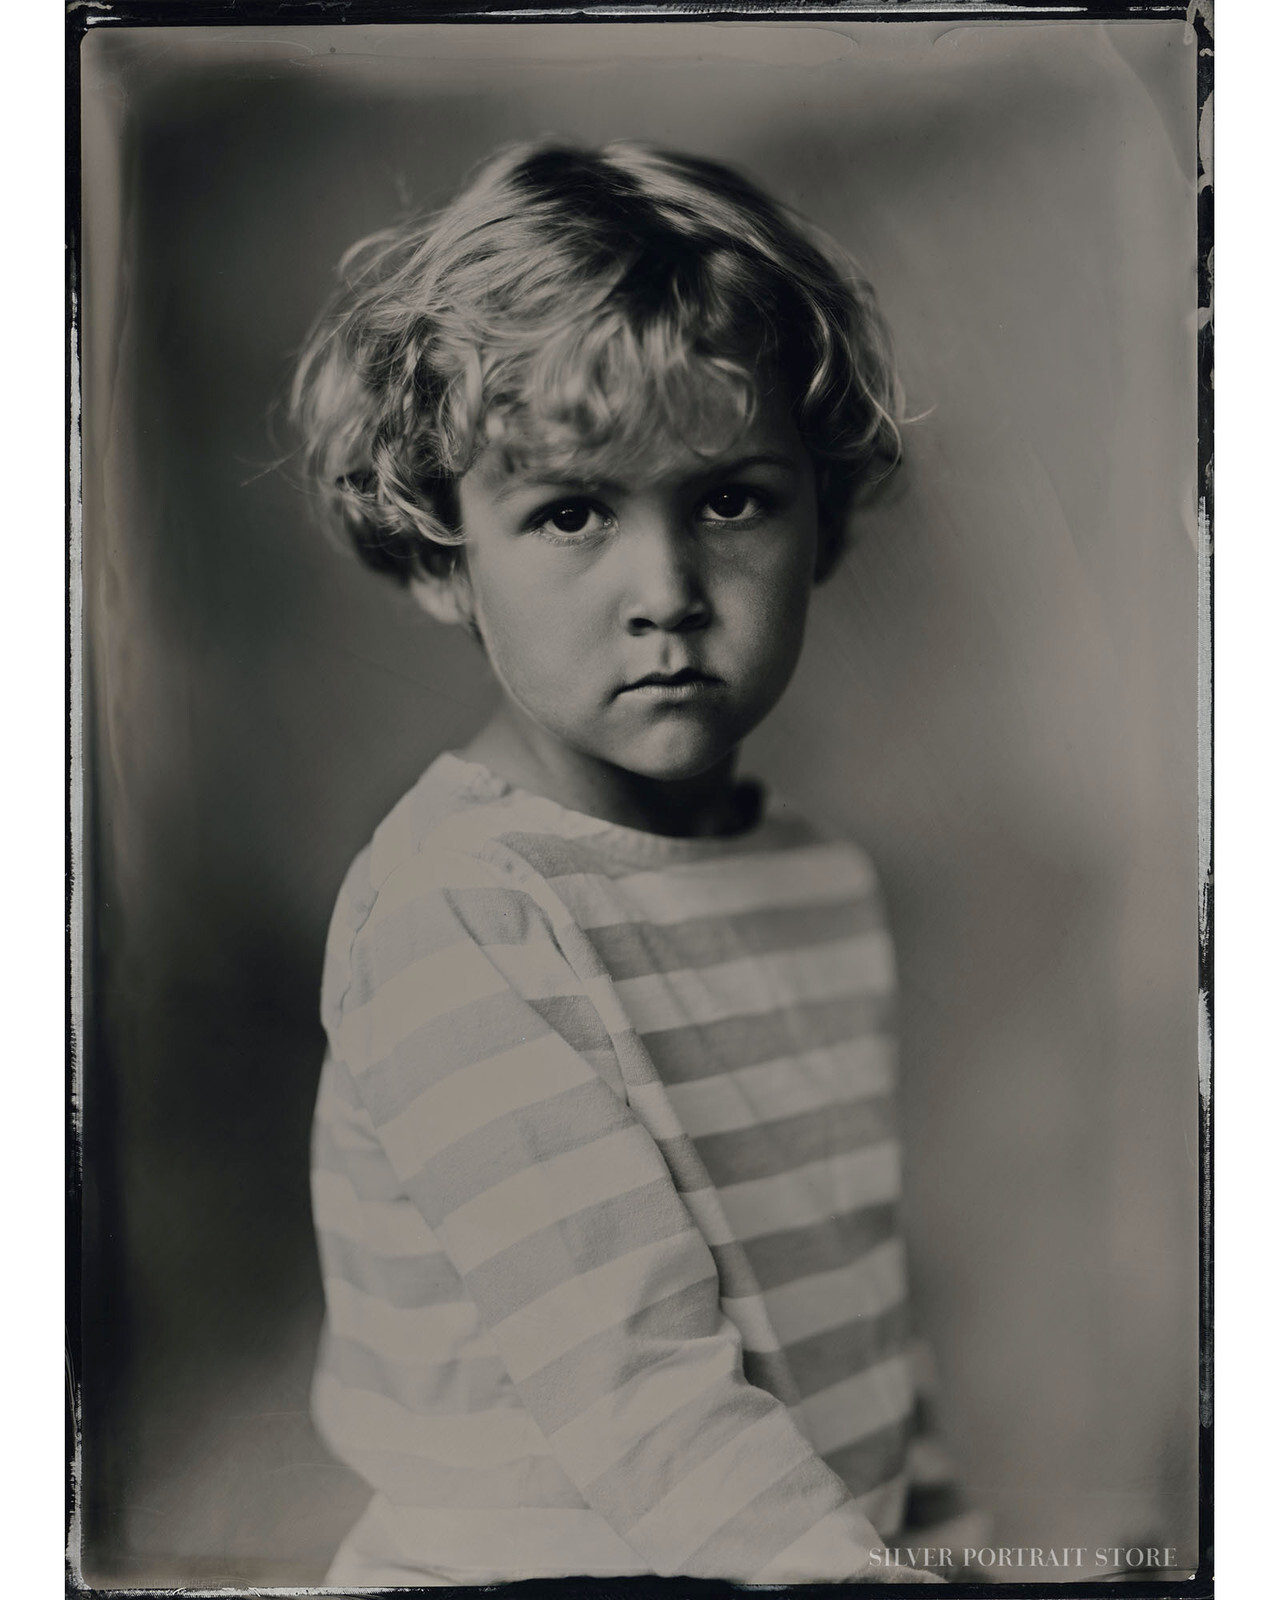 Max-Silver Portrait Store-scan from Wet plate collodion-Tintype 13 x 18 cm.